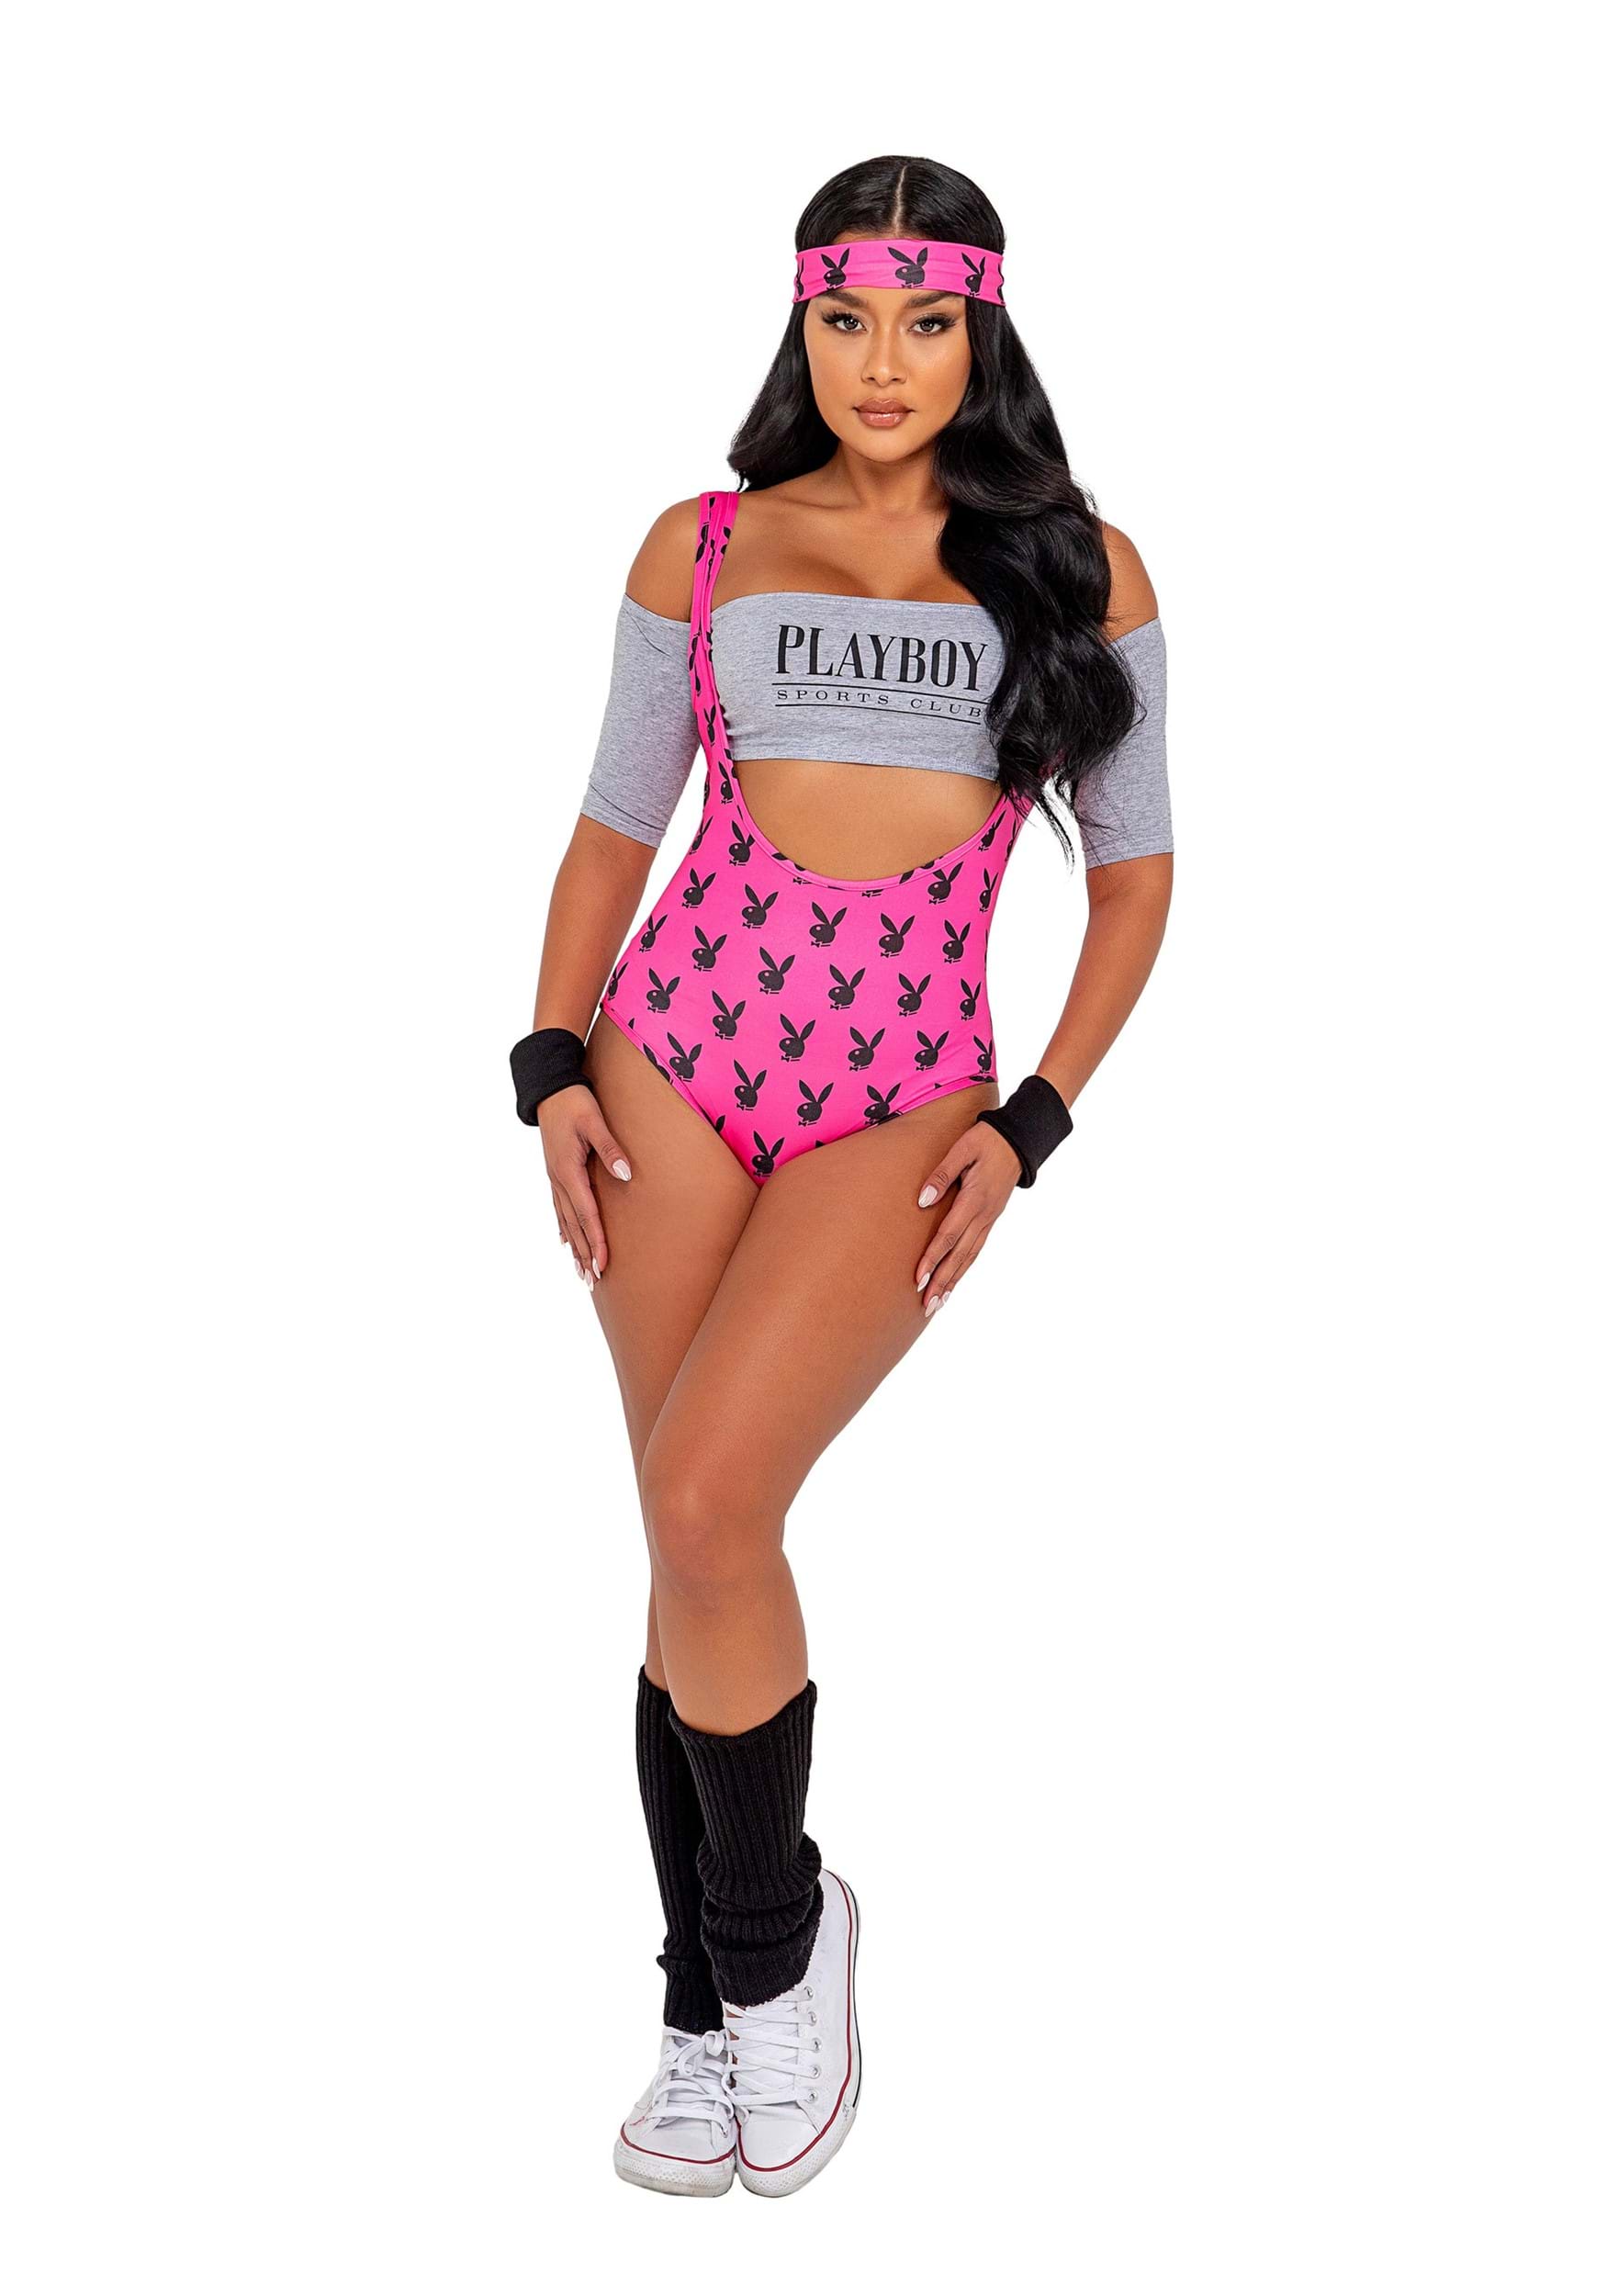 https://images.halloweencostumes.ca/products/83835/1-1/playboy-womens-retro-physical-costume.jpg